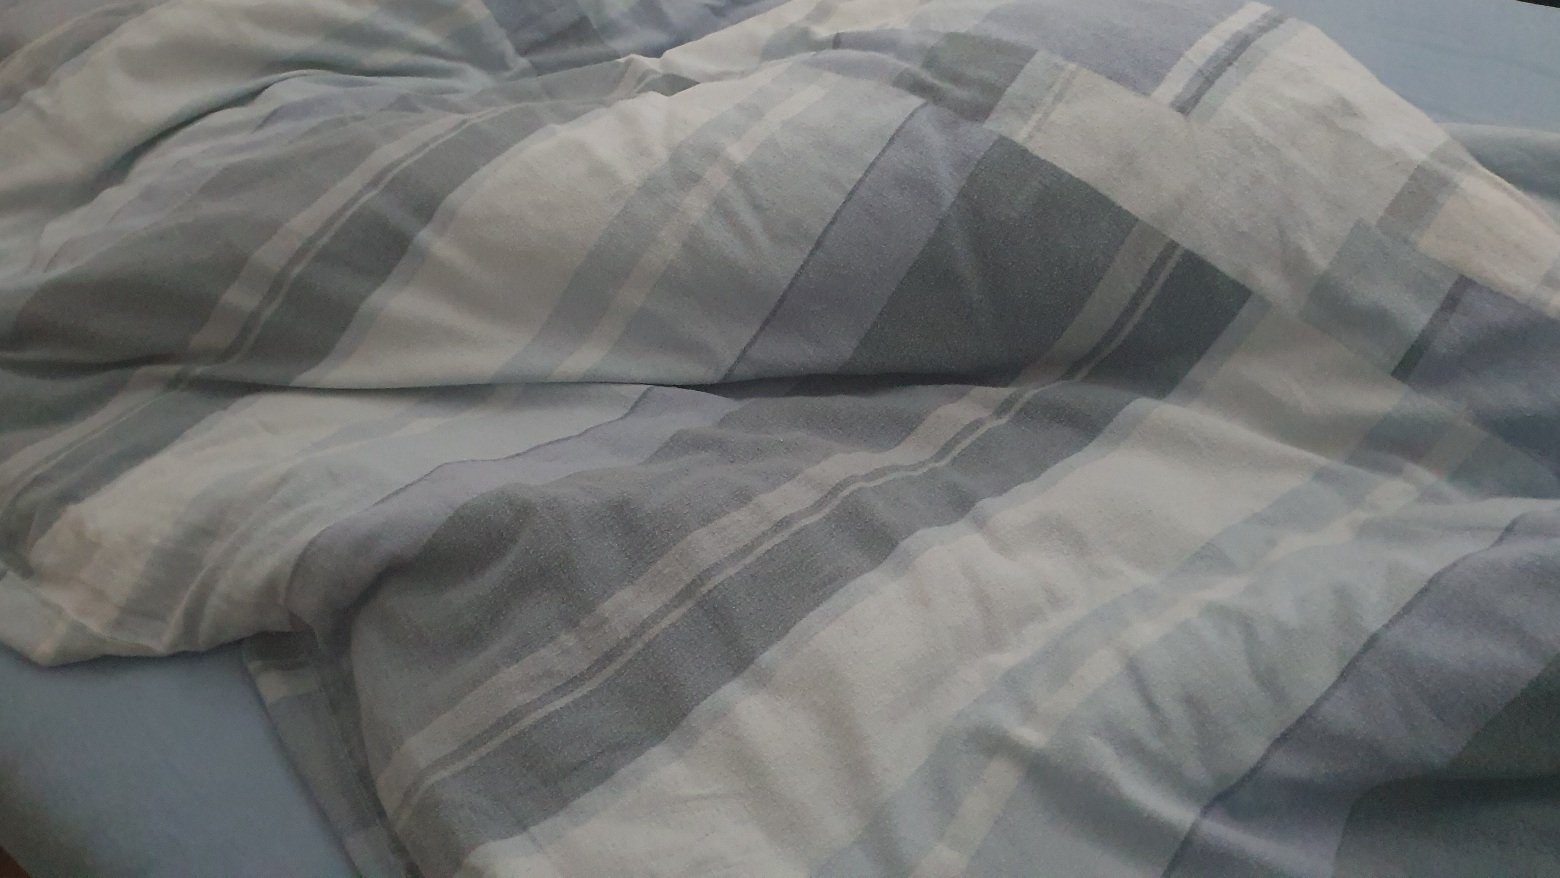 Photo of a duvet on a bed. Duvet cover has stripes in various shades of blue